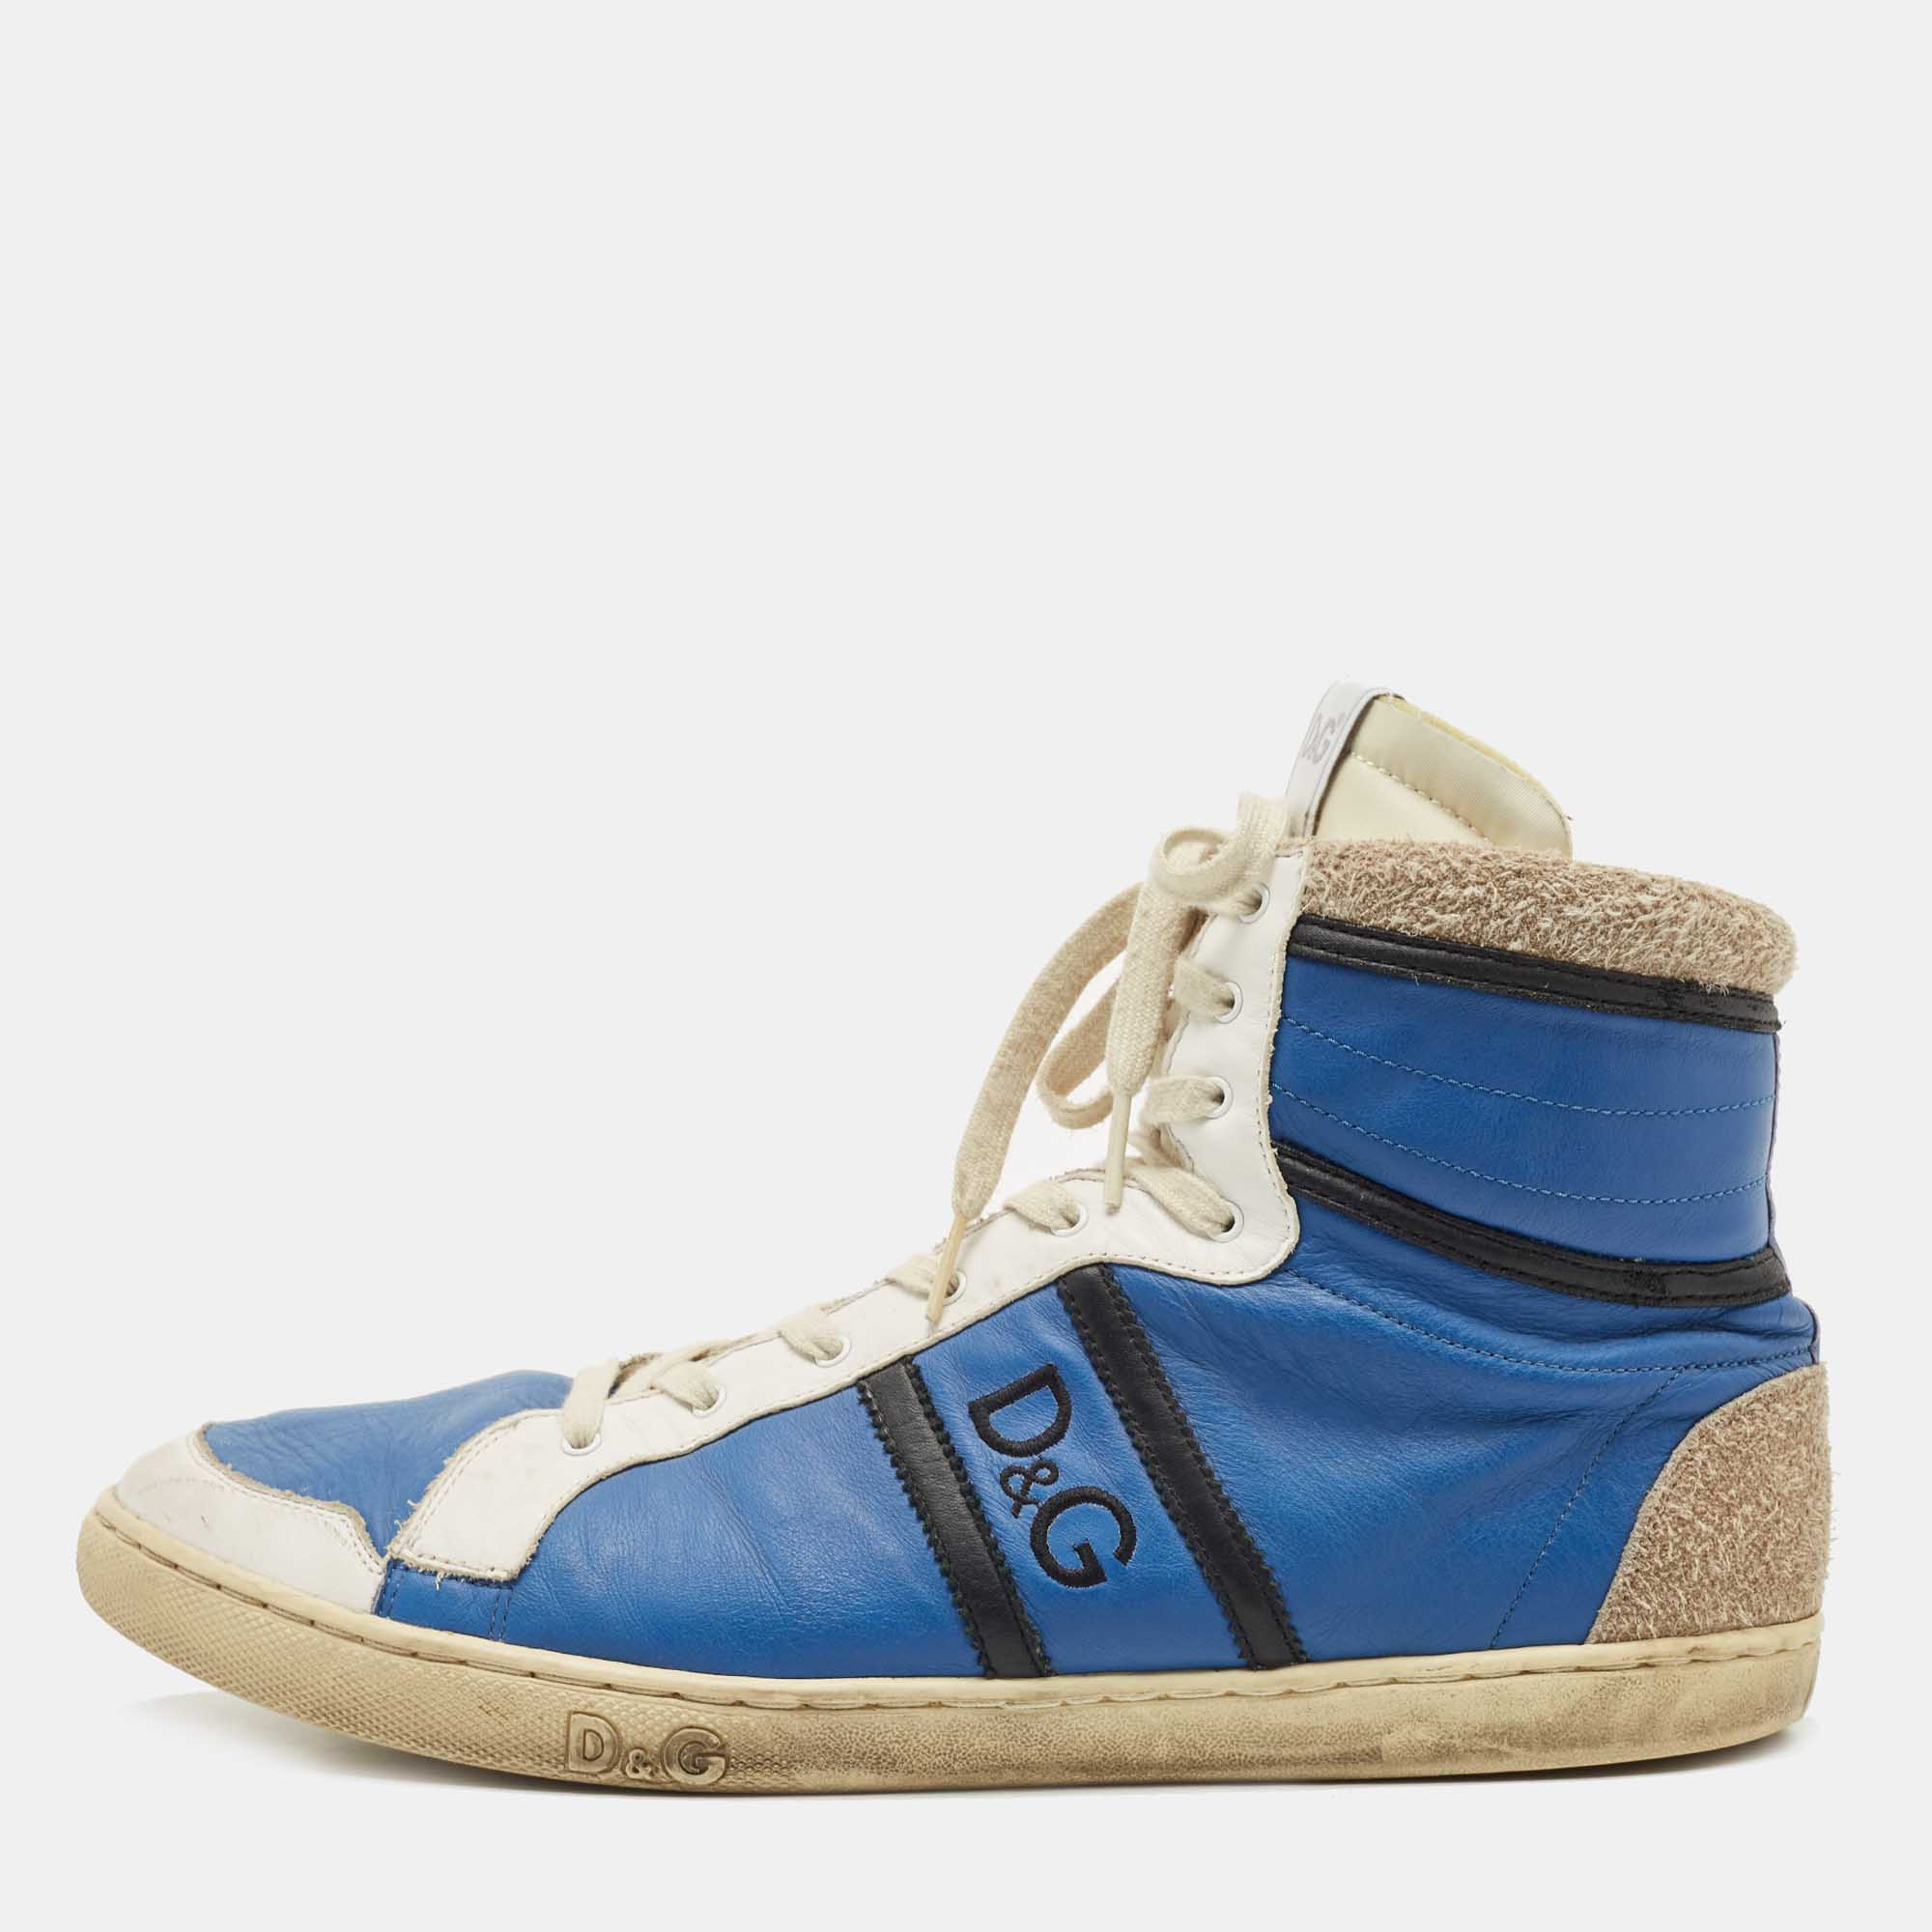 D&G Blue/White Leather And Suede High Top Sneakers Size 45